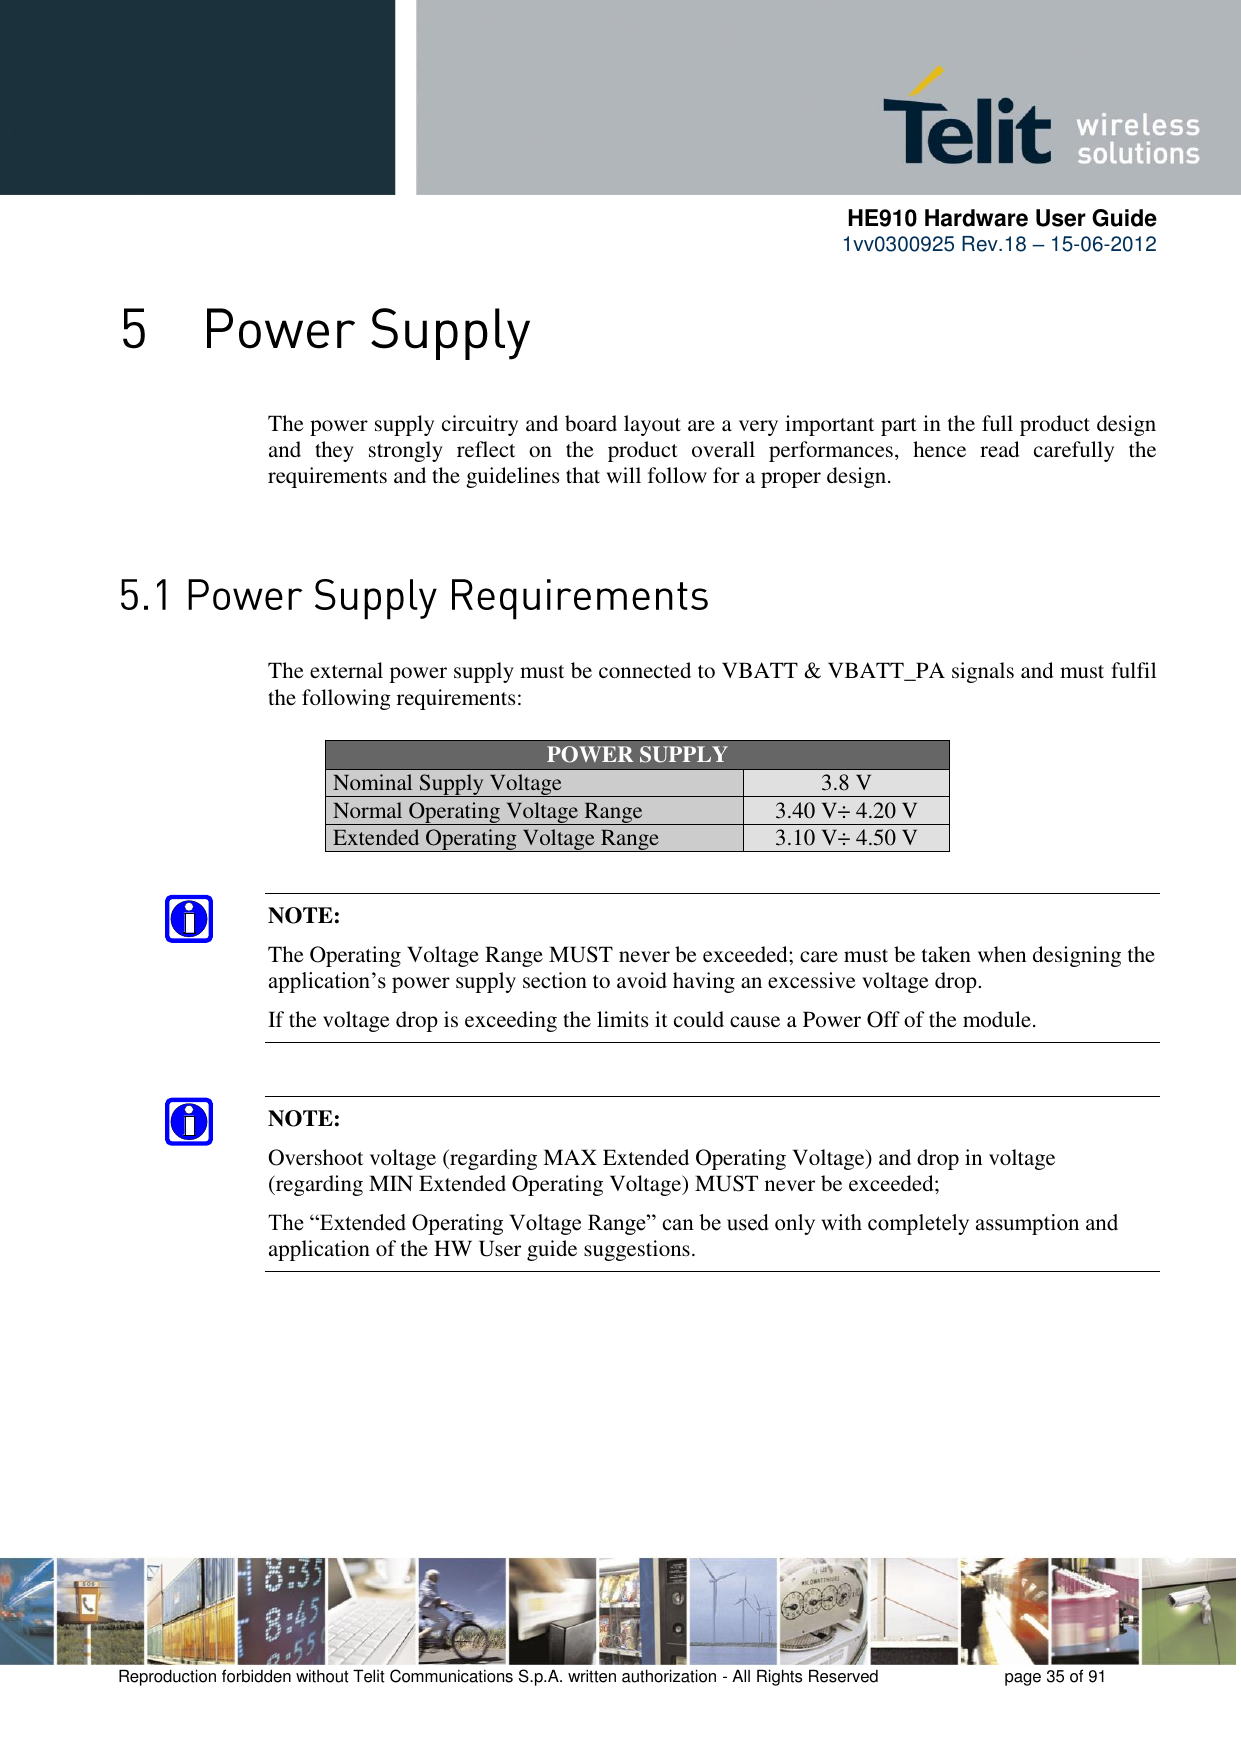      HE910 Hardware User Guide 1vv0300925 Rev.18 – 15-06-2012    Reproduction forbidden without Telit Communications S.p.A. written authorization - All Rights Reserved    page 35 of 91   The power supply circuitry and board layout are a very important part in the full product design and  they  strongly  reflect  on  the  product  overall  performances,  hence  read  carefully  the requirements and the guidelines that will follow for a proper design.    The external power supply must be connected to VBATT &amp; VBATT_PA signals and must fulfil the following requirements: POWER SUPPLY Nominal Supply Voltage 3.8 V Normal Operating Voltage Range 3.40 V÷ 4.20 V Extended Operating Voltage Range 3.10 V÷ 4.50 V NOTE: The Operating Voltage Range MUST never be exceeded; care must be taken when designing the application’s power supply section to avoid having an excessive voltage drop.  If the voltage drop is exceeding the limits it could cause a Power Off of the module. NOTE: Overshoot voltage (regarding MAX Extended Operating Voltage) and drop in voltage (regarding MIN Extended Operating Voltage) MUST never be exceeded;  The “Extended Operating Voltage Range” can be used only with completely assumption and application of the HW User guide suggestions.   